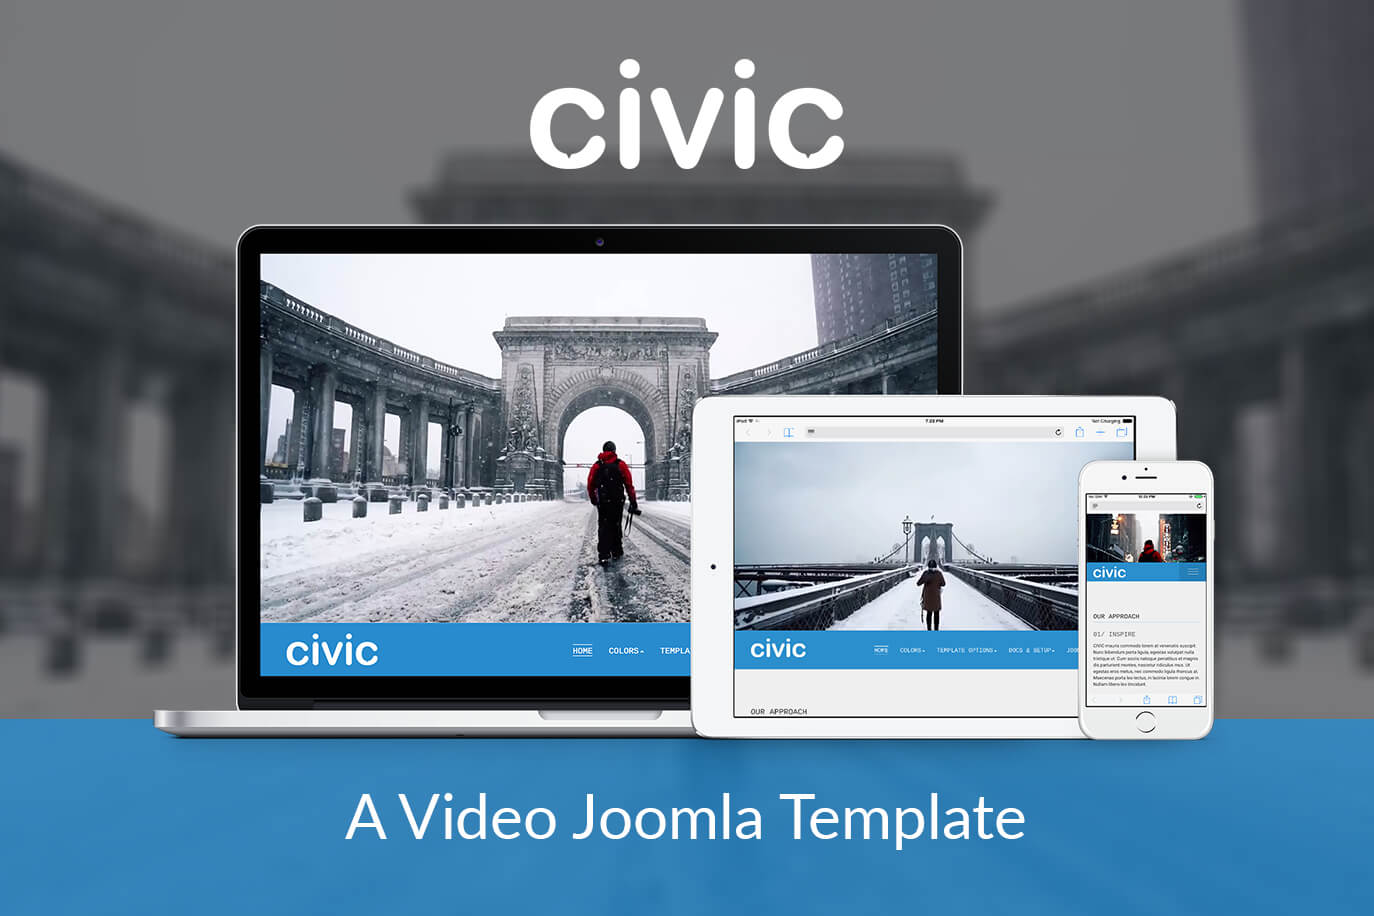 A Joomla template with a video slideshow - Civic